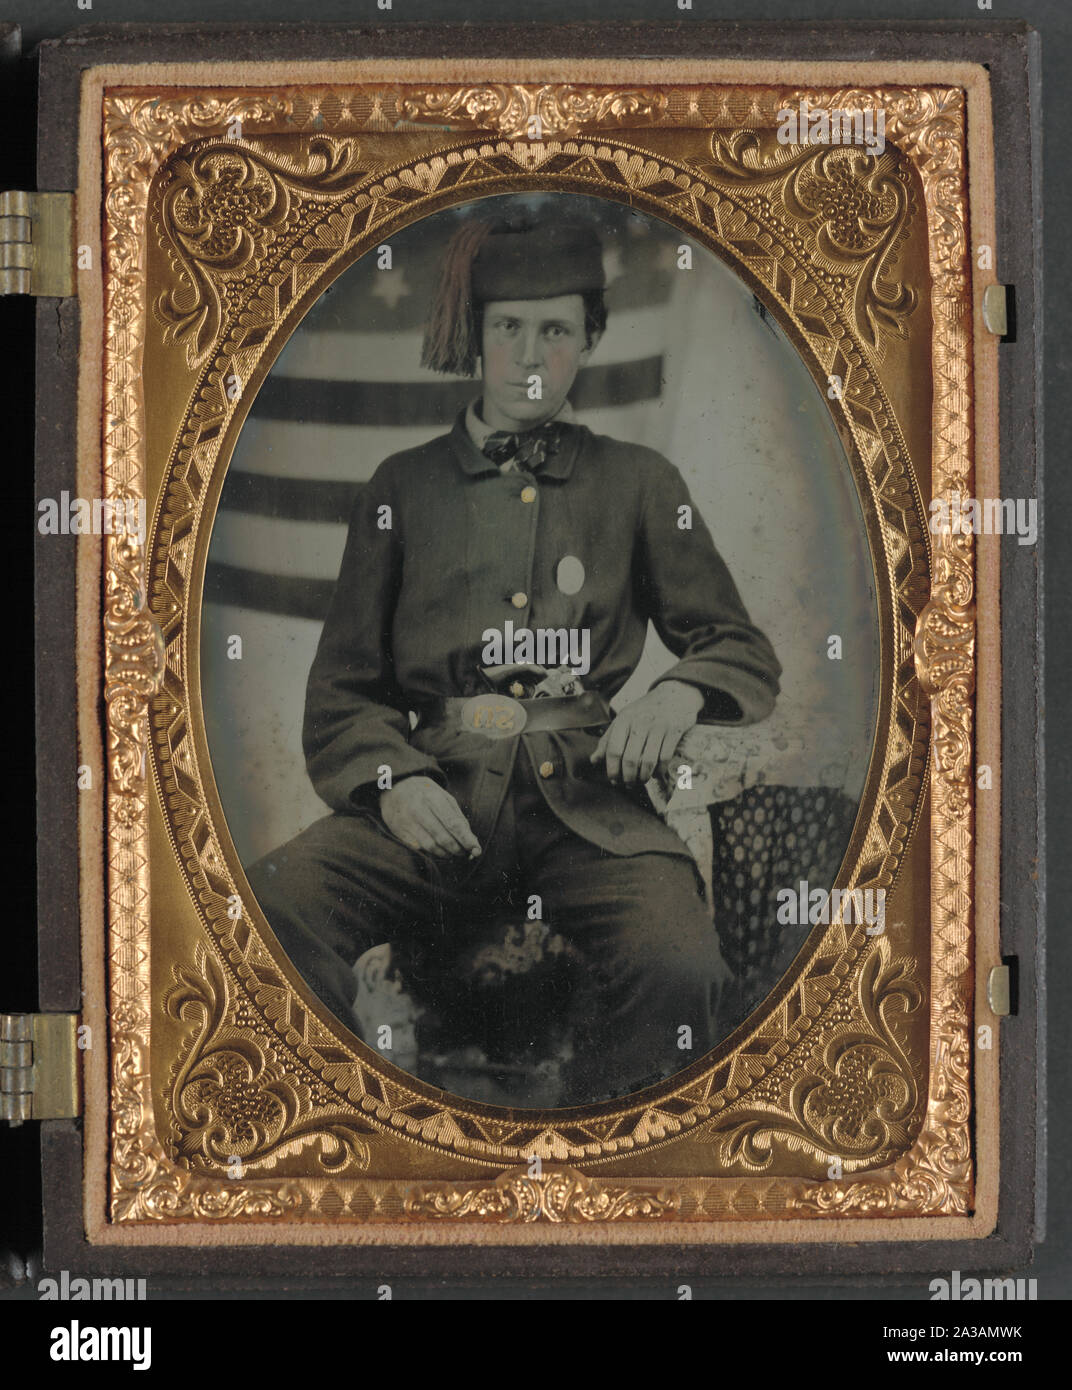 Sergeant Albert S. Brownson of Company G, 12th Indiana Infantry Regiment, and Company D, 5th Indiana Cavalry Regiment, in uniform and upside down U.S. belt buckle with revolver in front of American flag backdrop Stock Photo